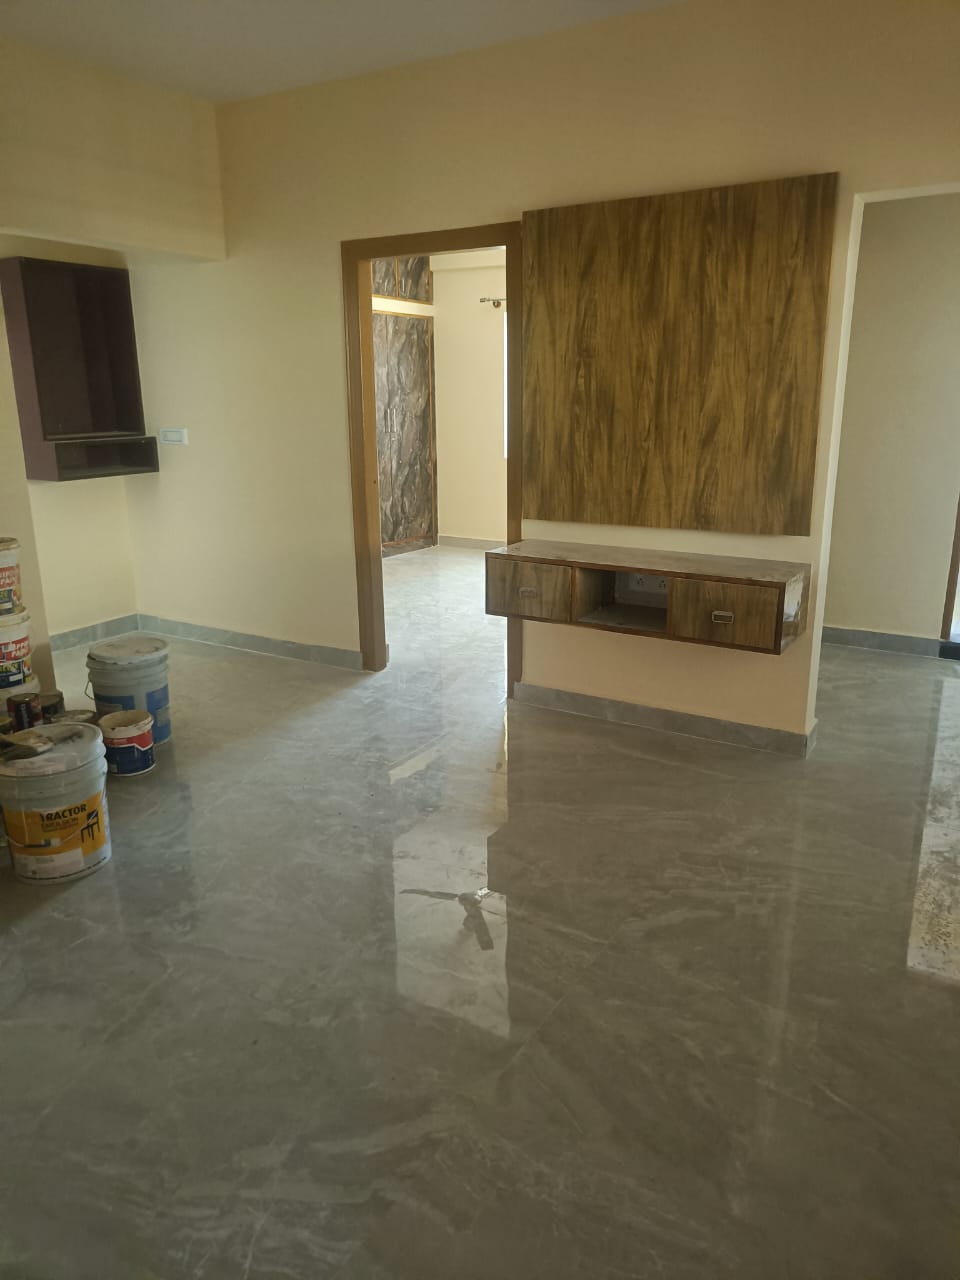 3 BHK Residential Apartment for Lease Only at JAML2 - 2696 in Banaswadi